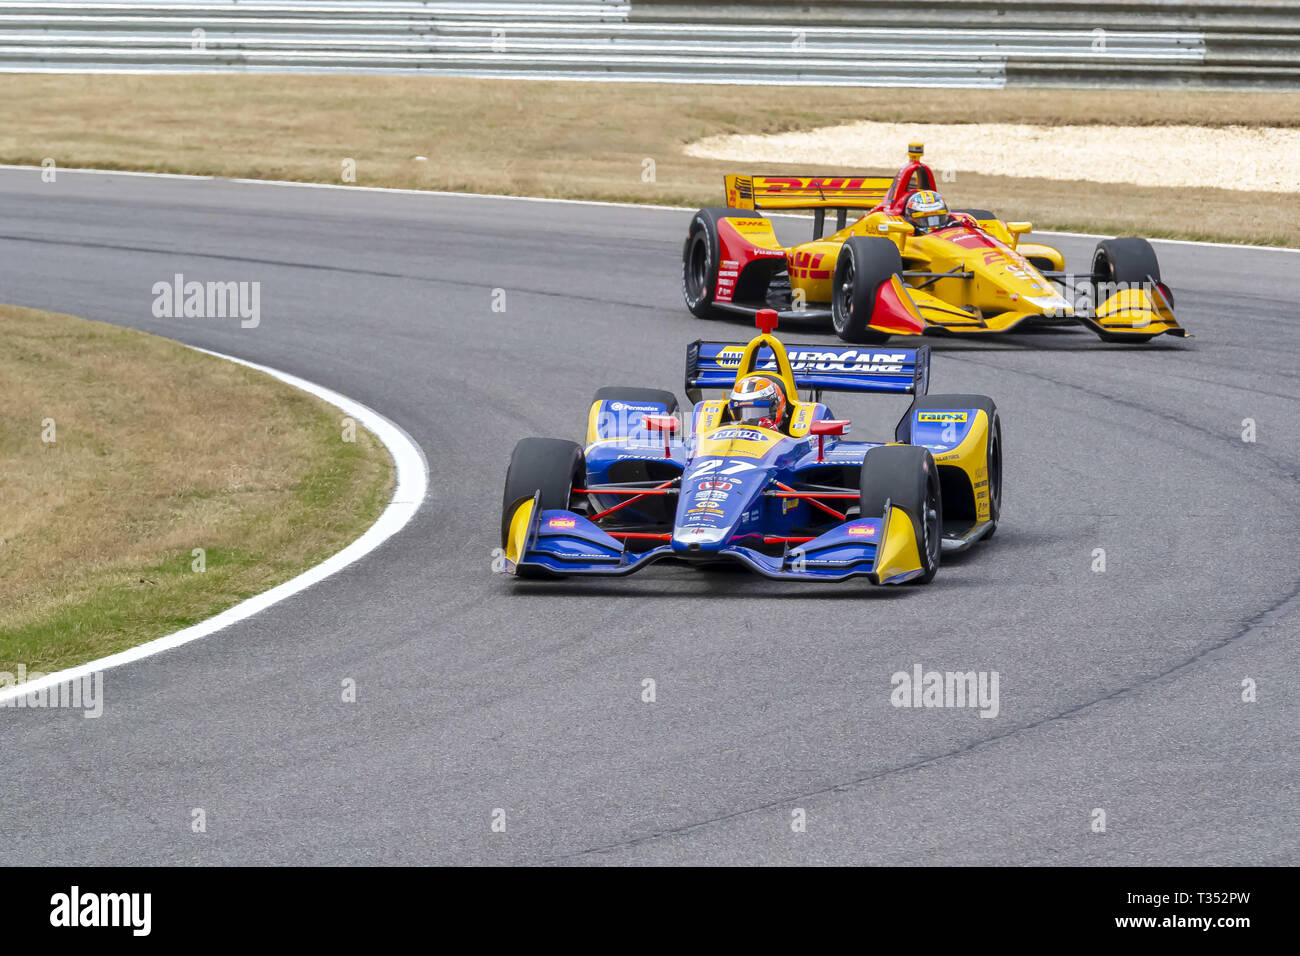 Birmingham, Alabama, USA. 6th Apr, 2019. ALEXANDER ROSSI (27) of the United States goes through the turns during practice for the Honda Indy Grand Prix of Alabama at Barber Motorsports Park in Birmingham, Alabama. (Credit Image: © Walter G Arce Sr Asp Inc/ASP) Stock Photo